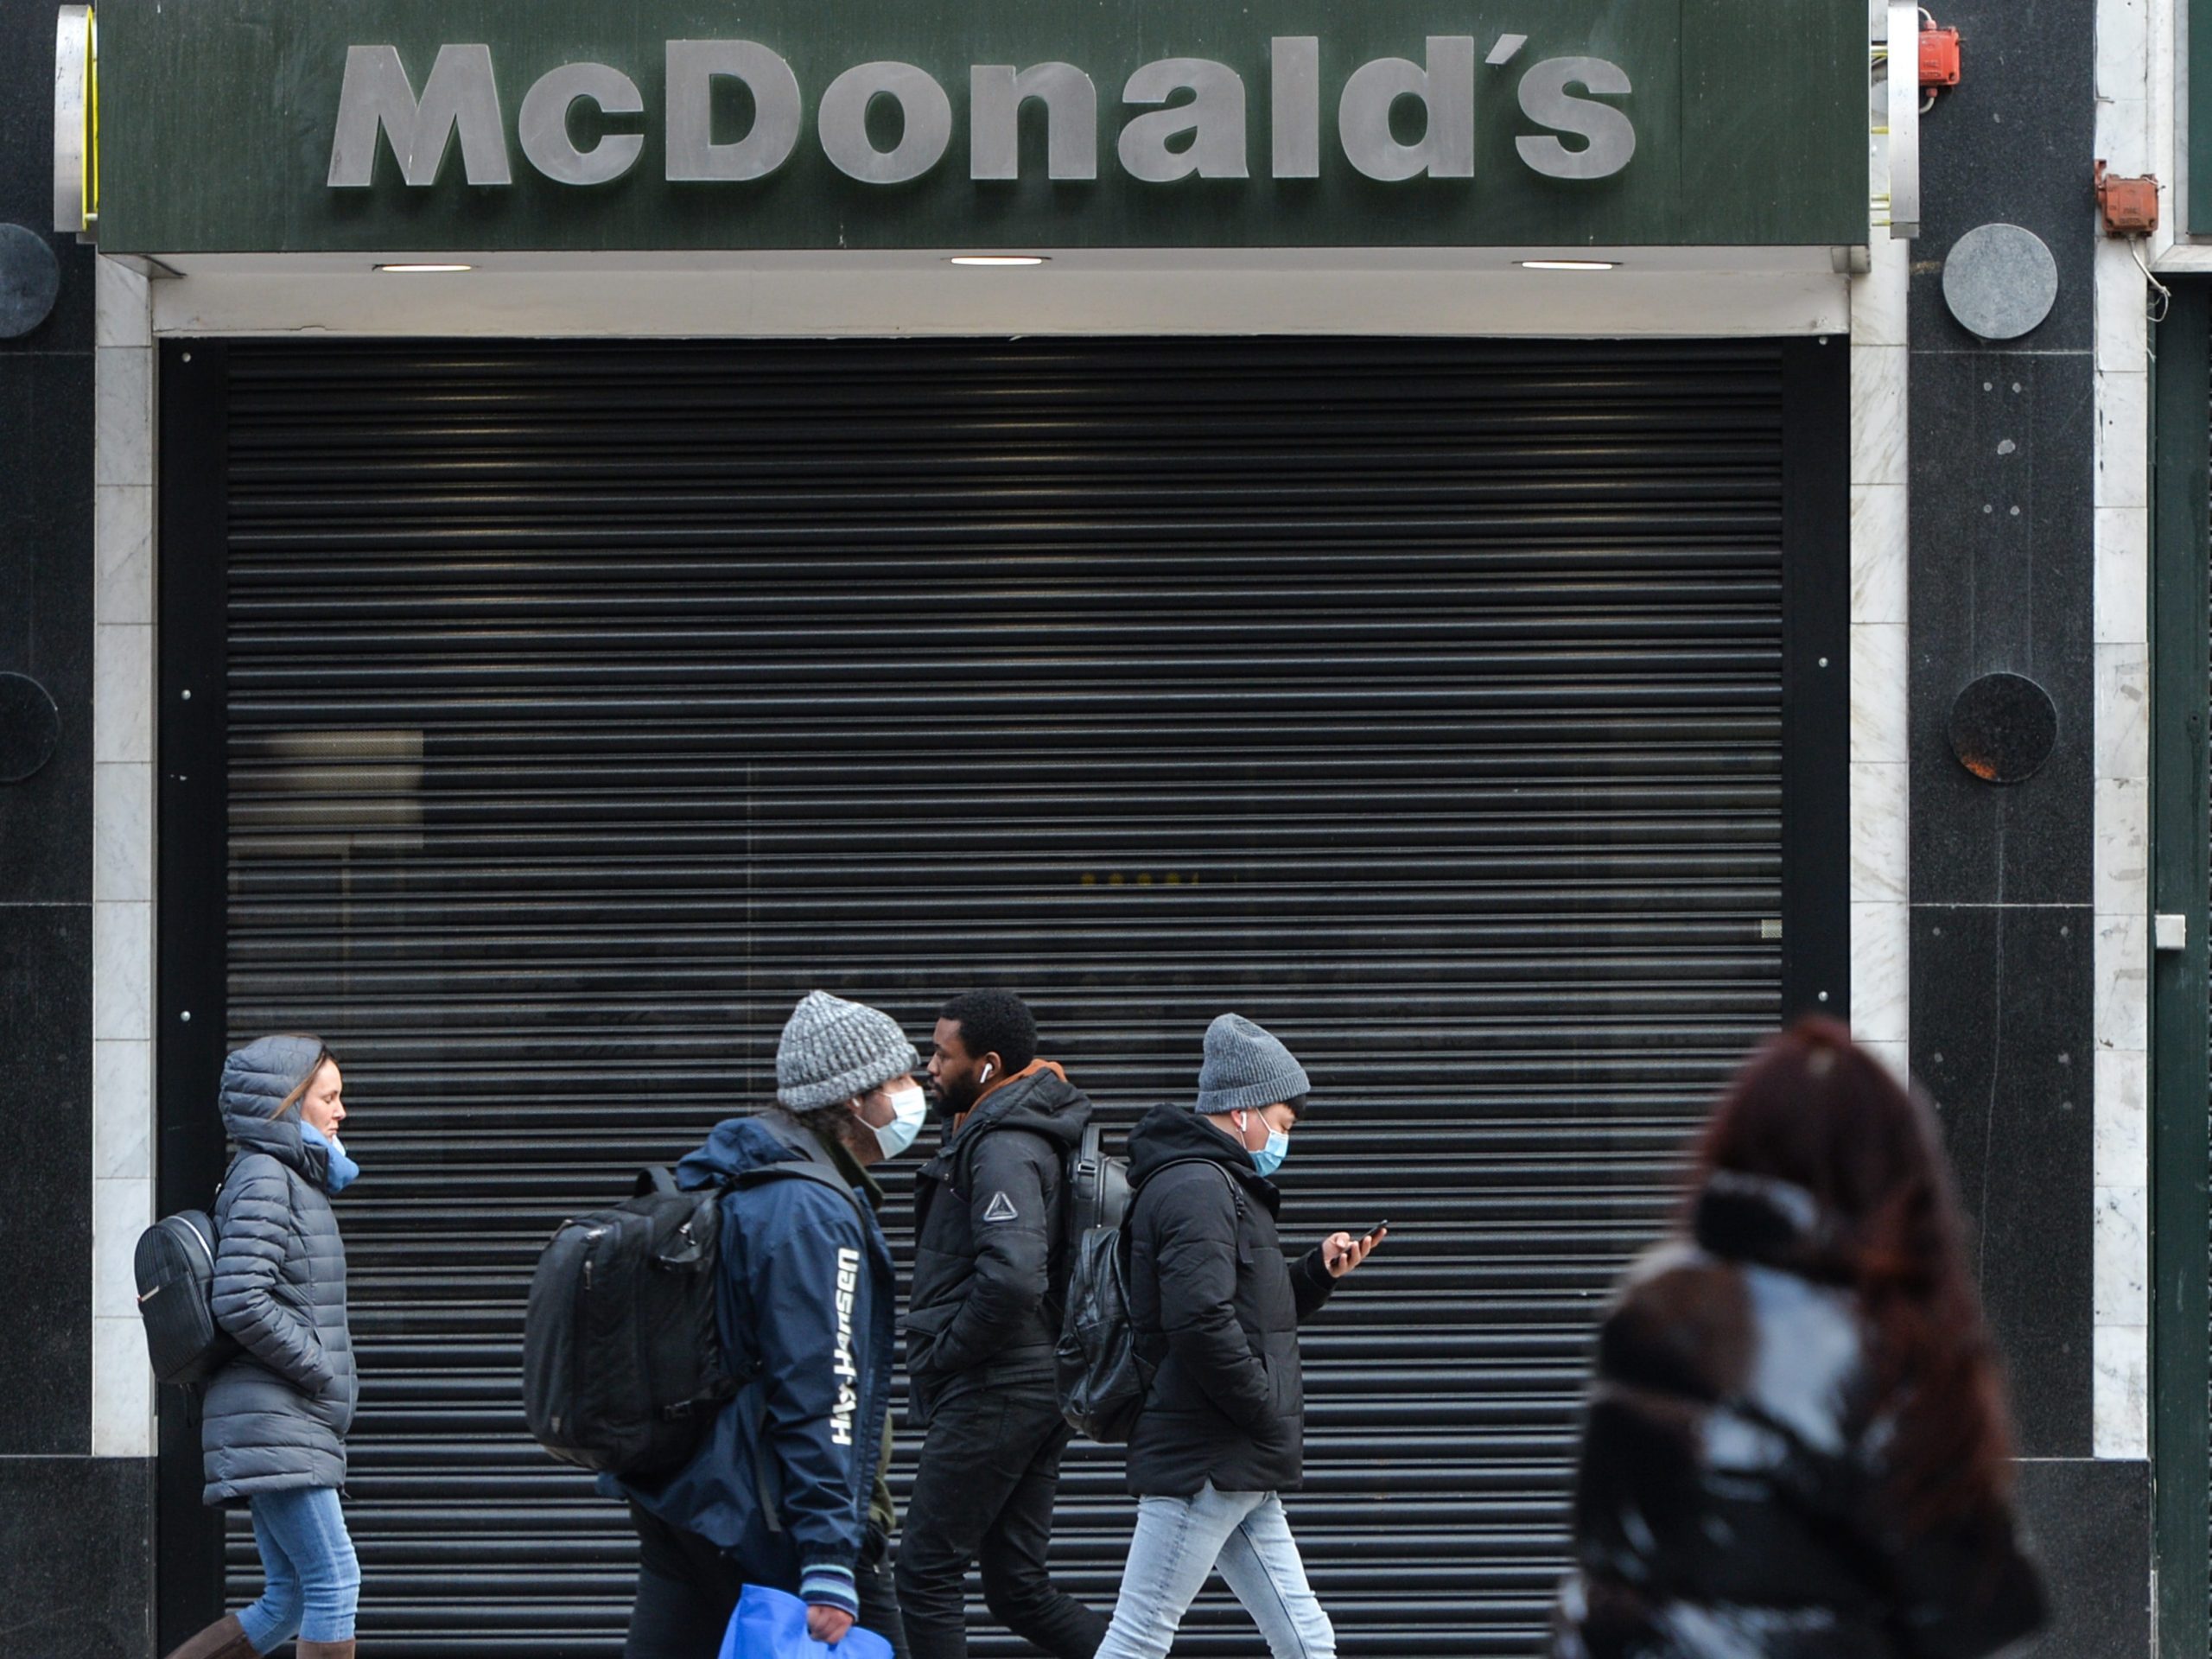 People wearing face masks walk by a closed McDonald's on Grafton Street in Dublin city center, during the COVID-19 pandemic lockdown.